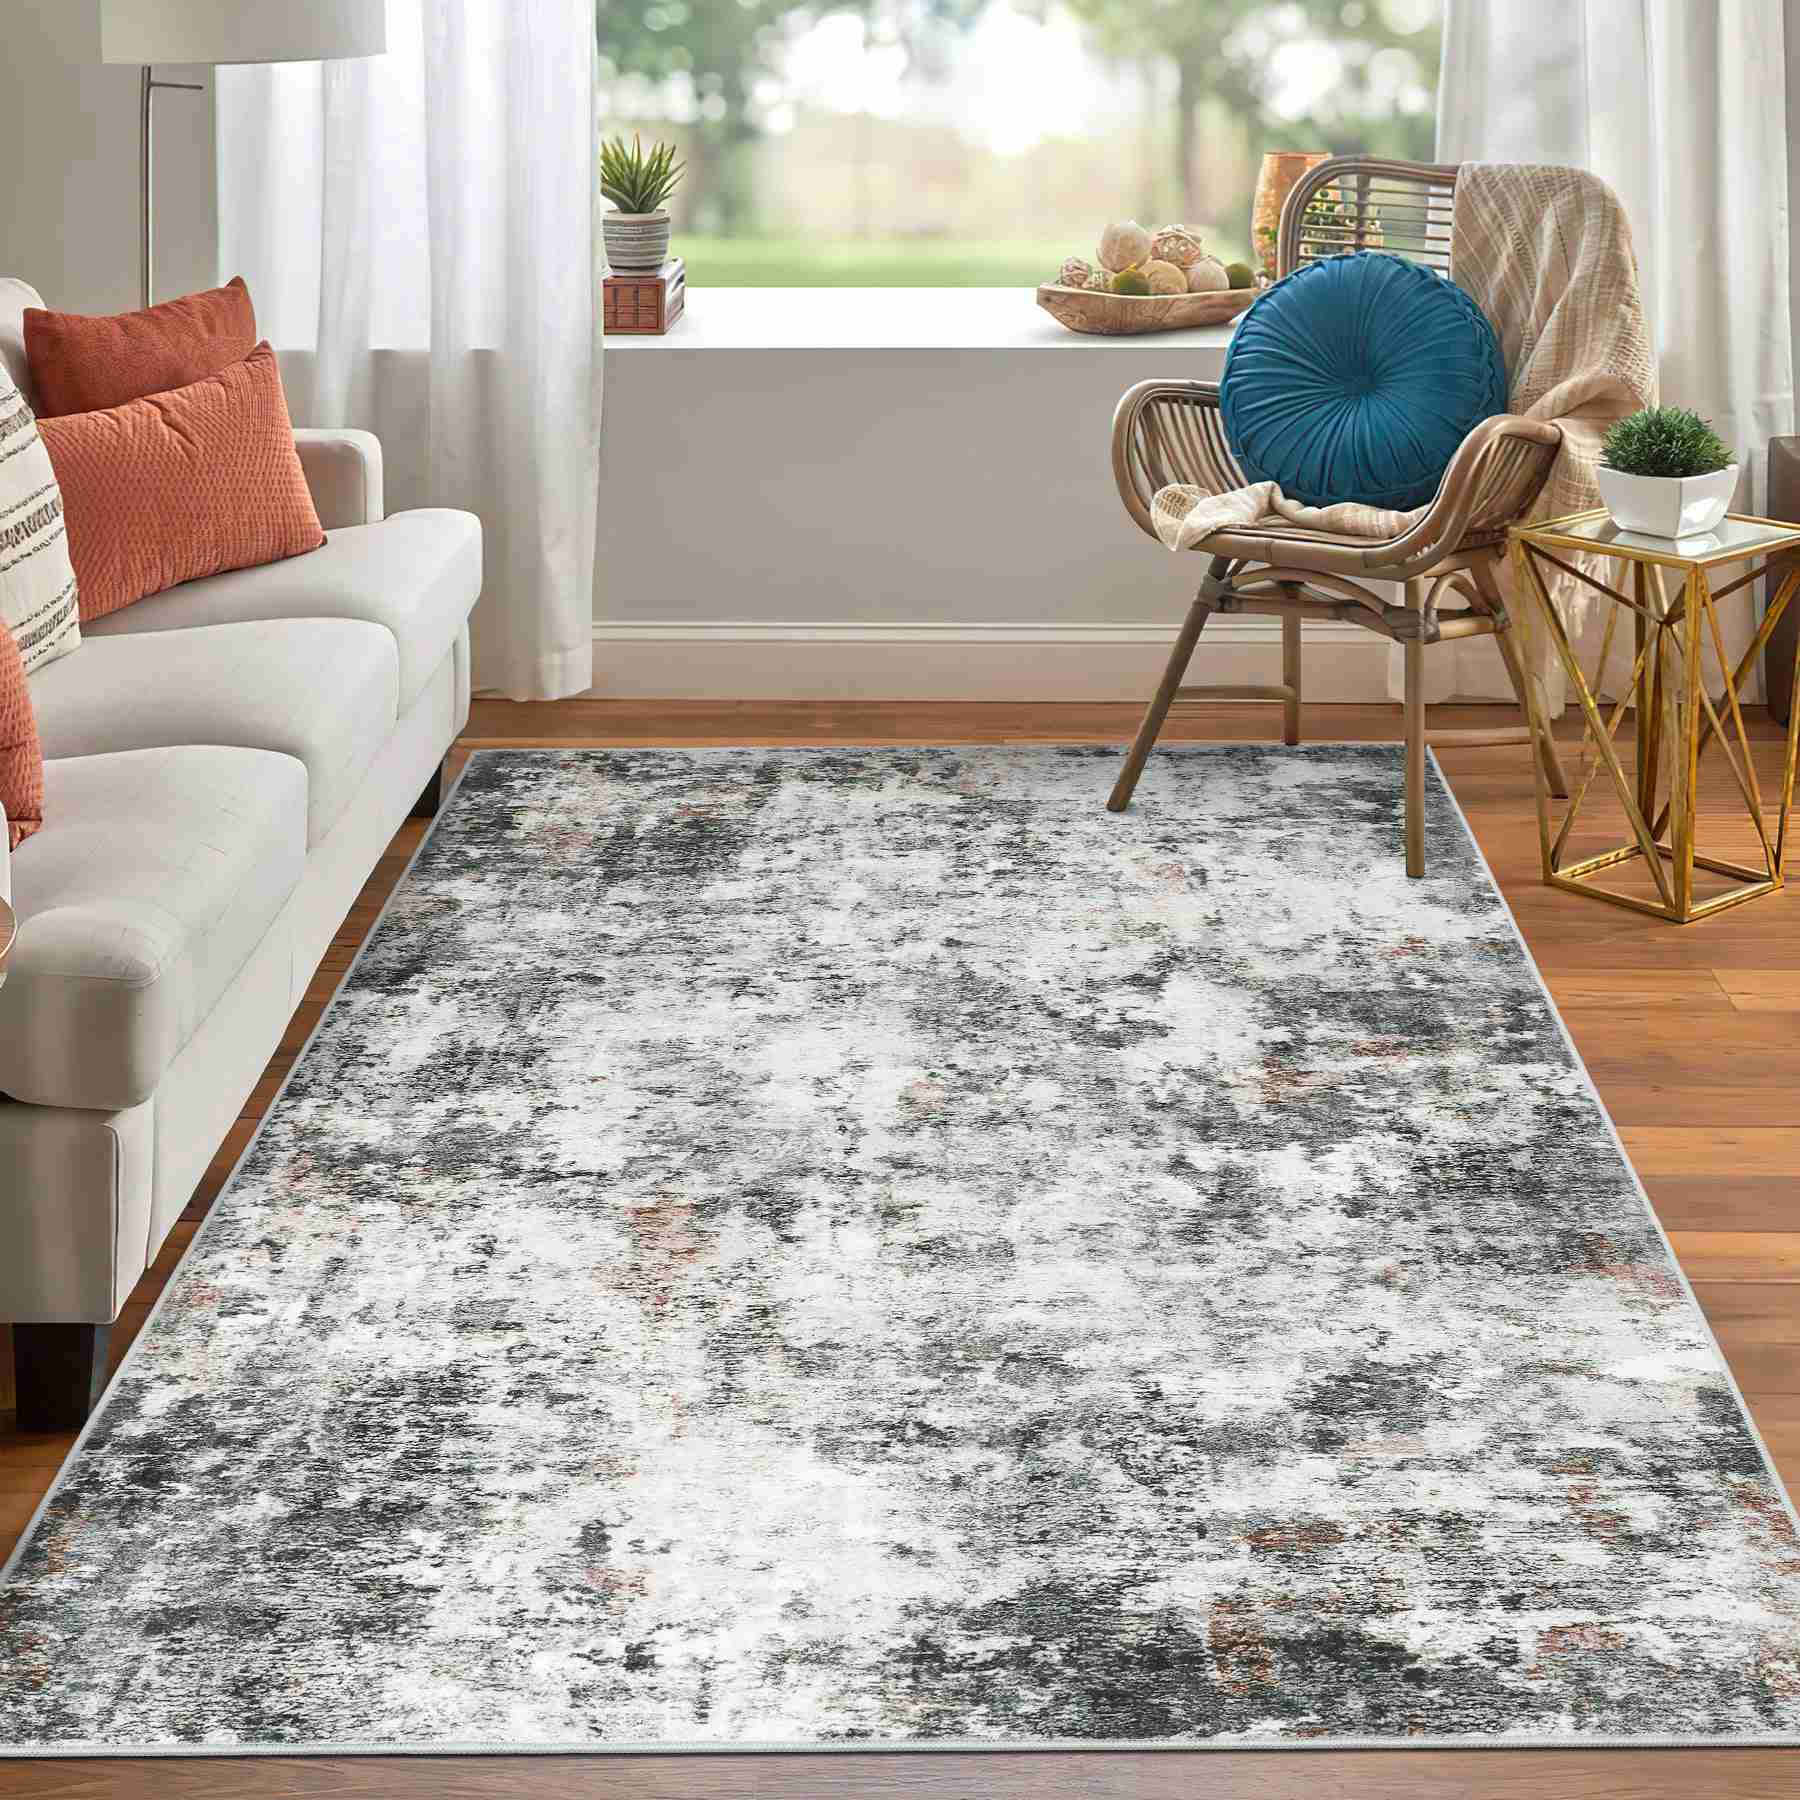 ComiComi Washable Rugs Easy To Clean Jebel Mountain End